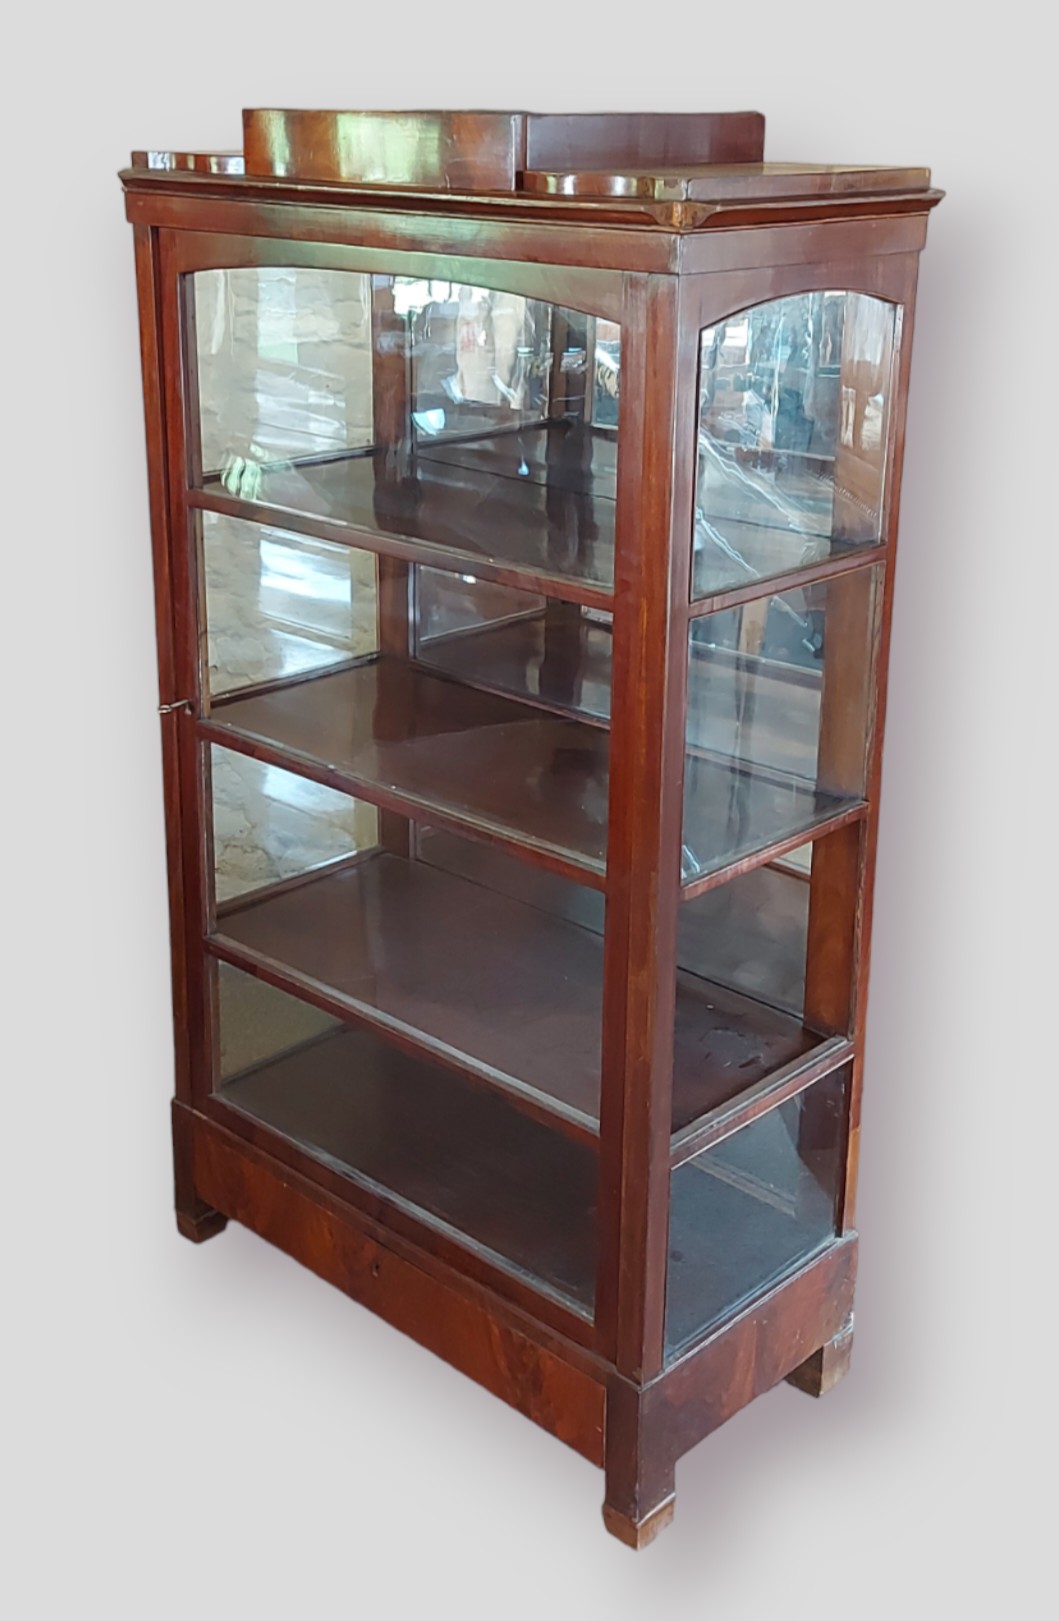 A 19th Century Continental mahogany display cabinet with a single glazed door enclosing shelves